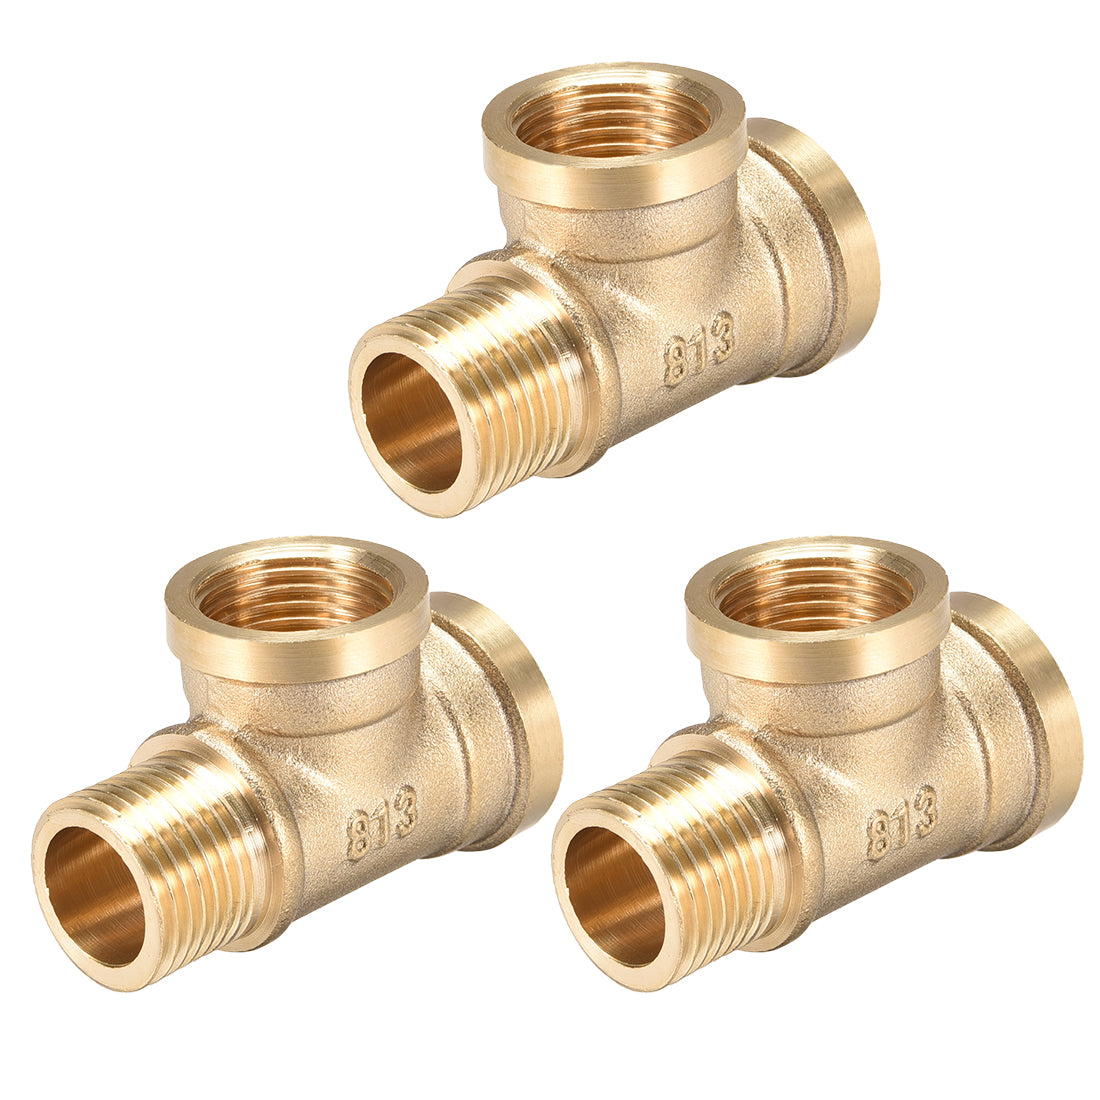 uxcell Uxcell Brass Tee Pipe Fitting G1/2 Male x G1/2 Female x G1/2 Female T Shaped Connector Coupler 3pcs